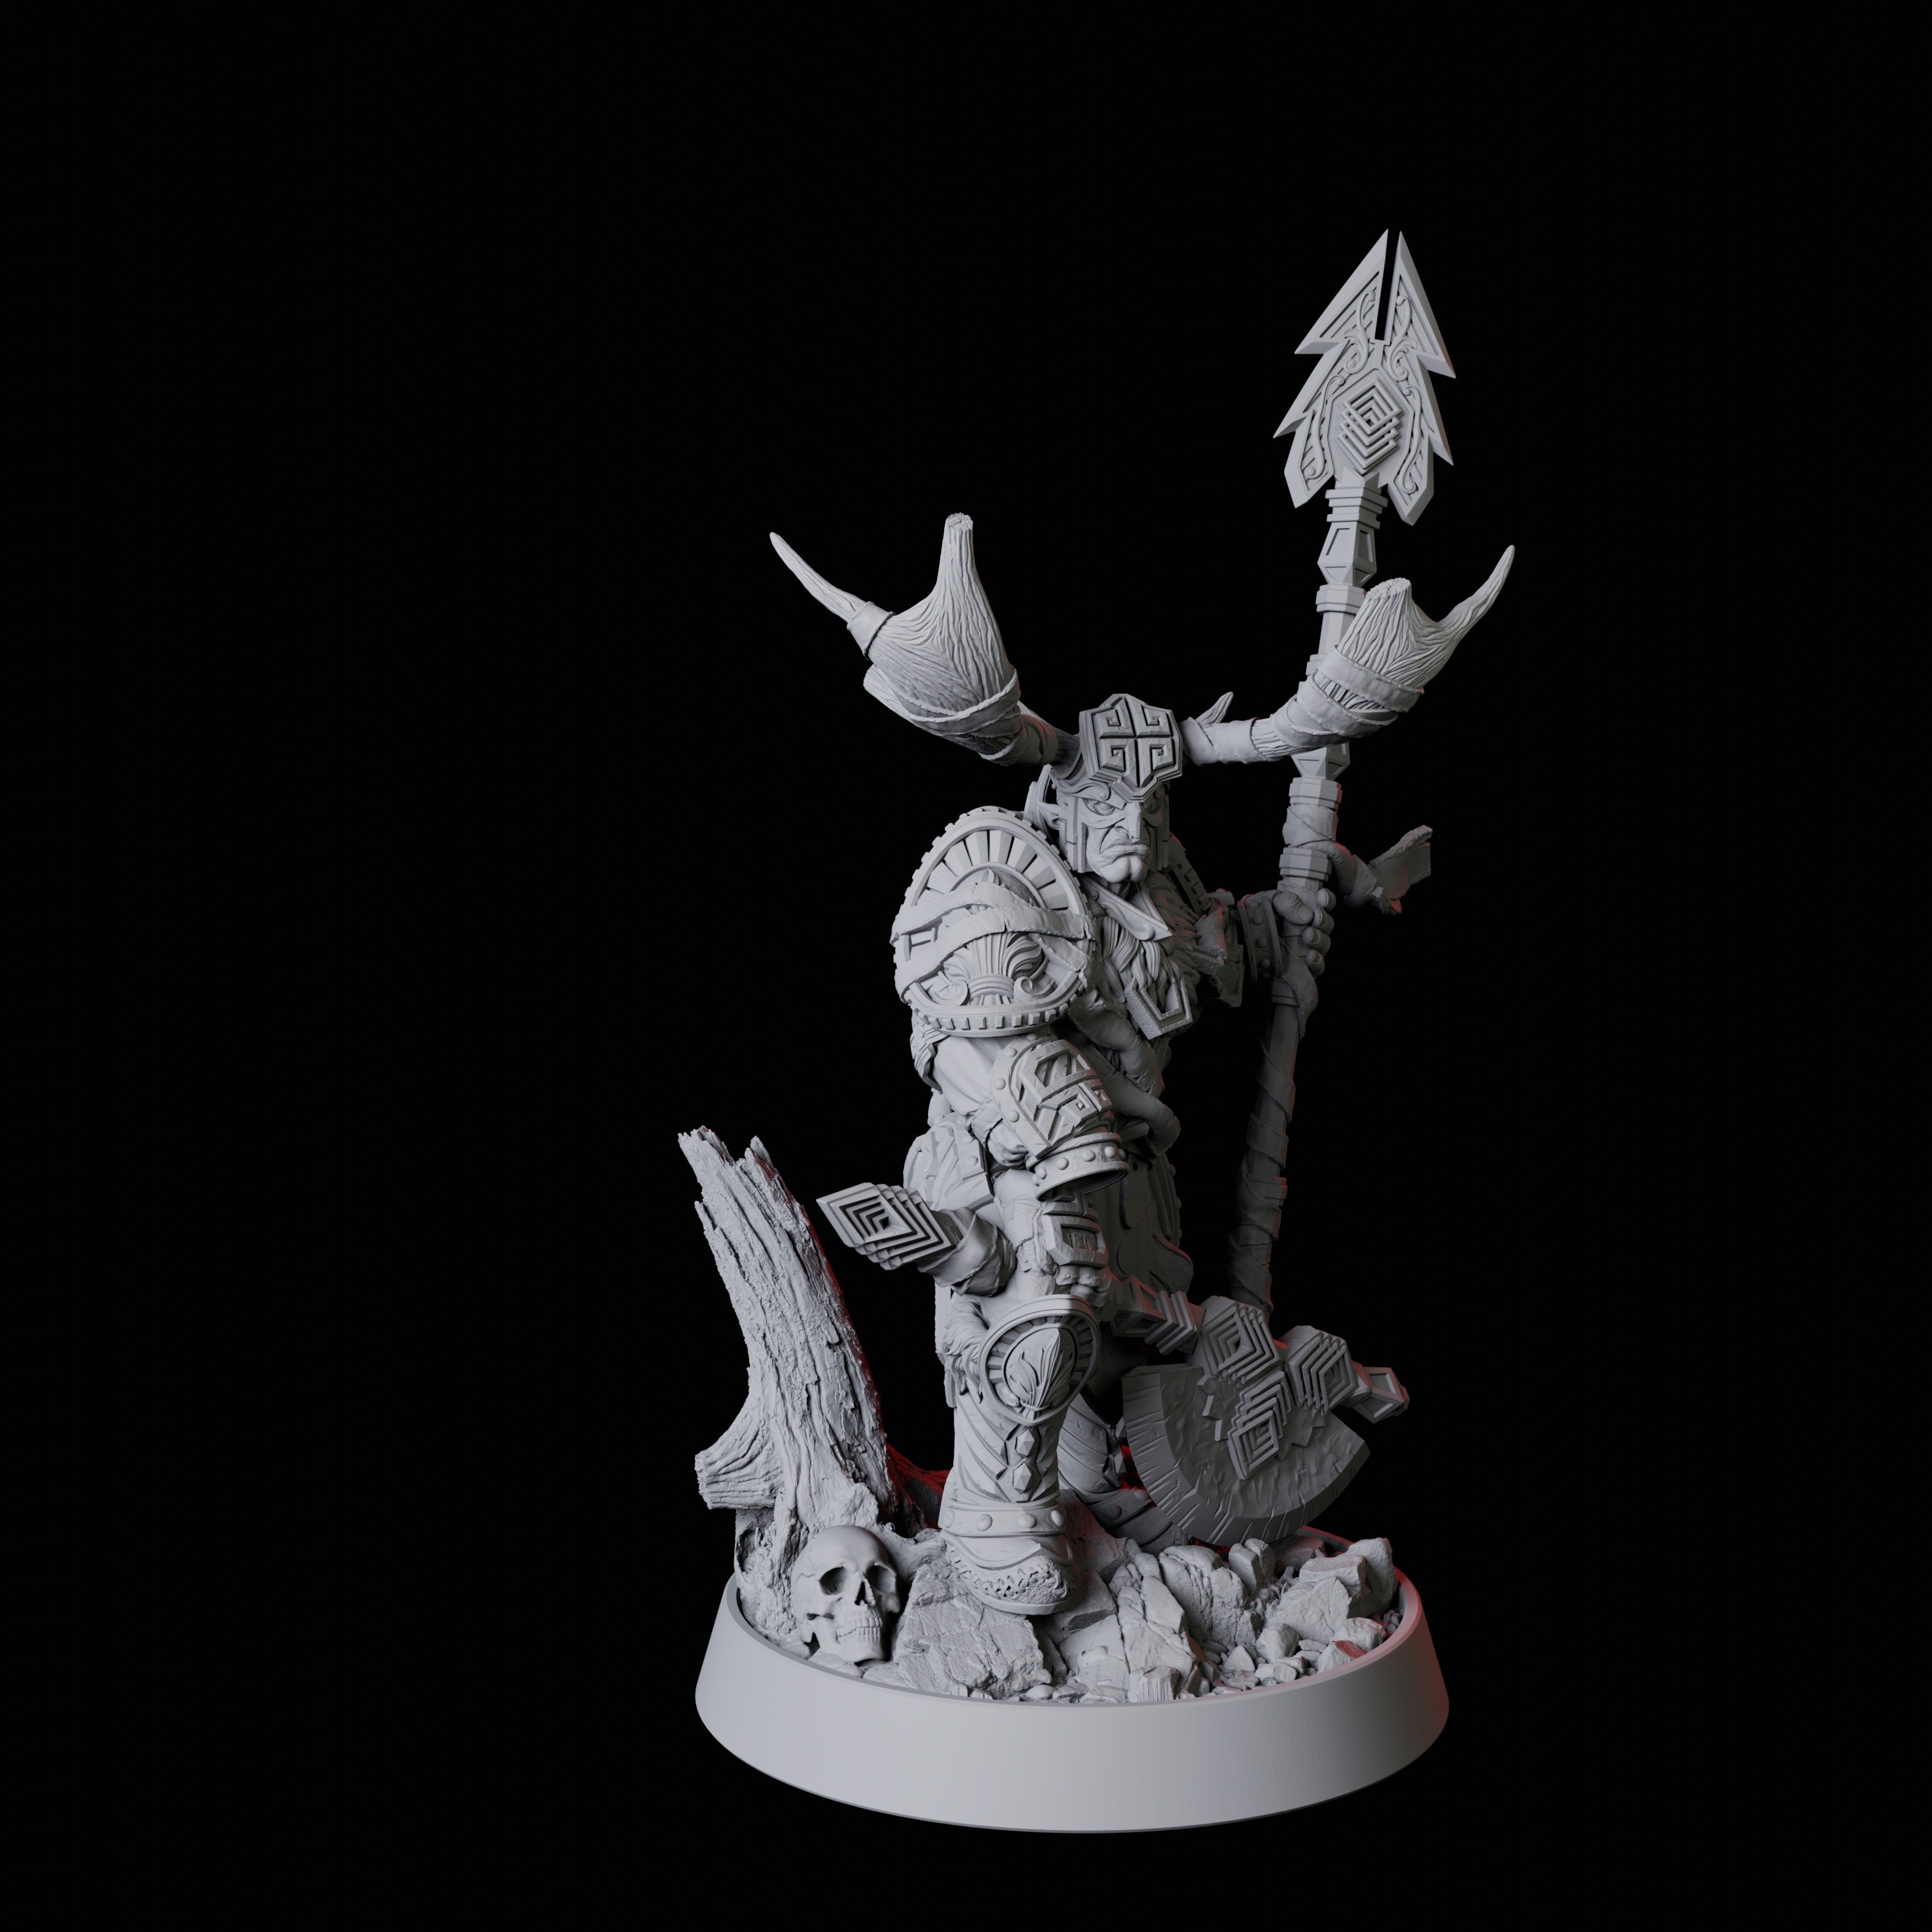 Warrior Druid Miniature for Dungeons and Dragons